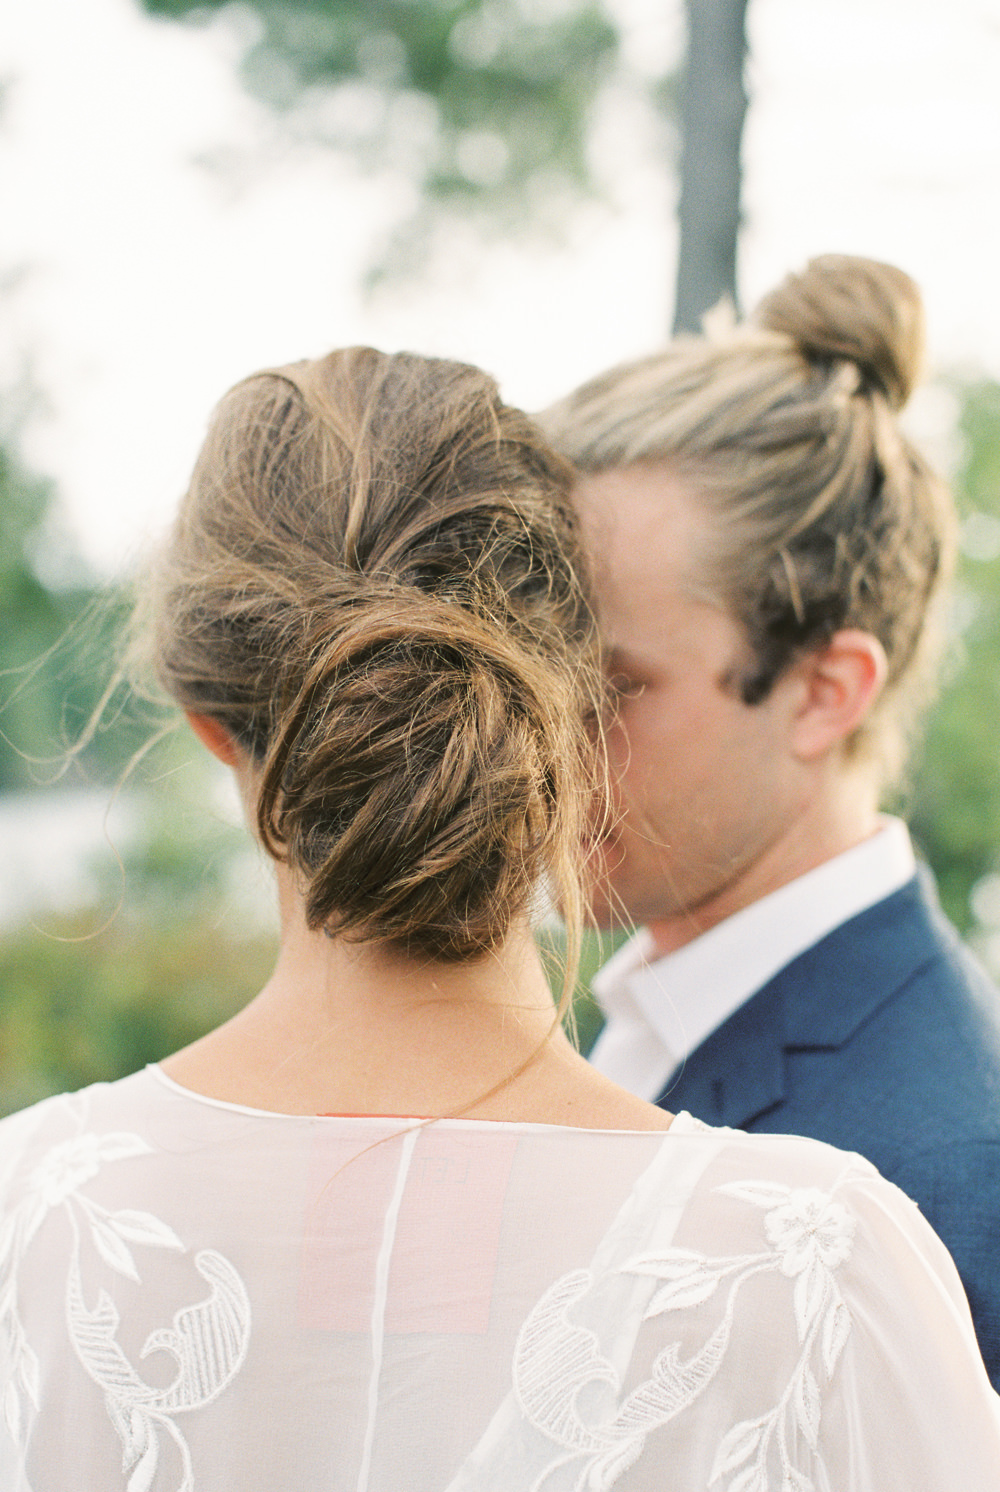 perfect messy bun low natural wedding hair and matching man bun for Adirondack island elopement by Mary Dougherty